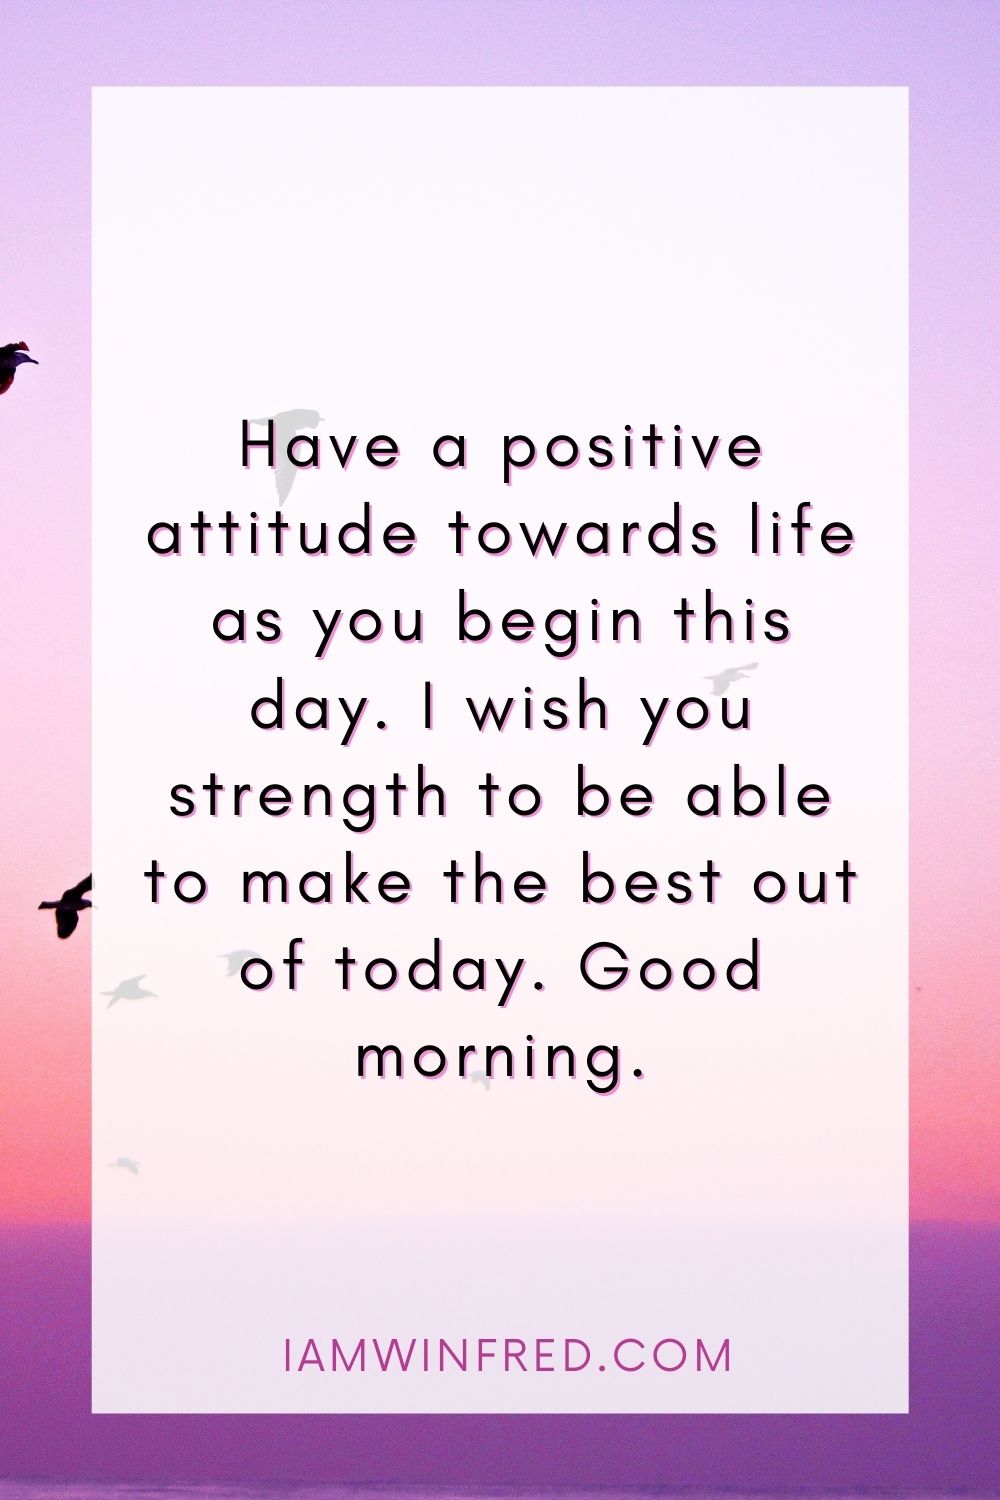 Have A Positive Attitude Towards Life As You Begin This Day. I Wish You Strength To Be Able To Make The Best Out Of Today. Good Morning.